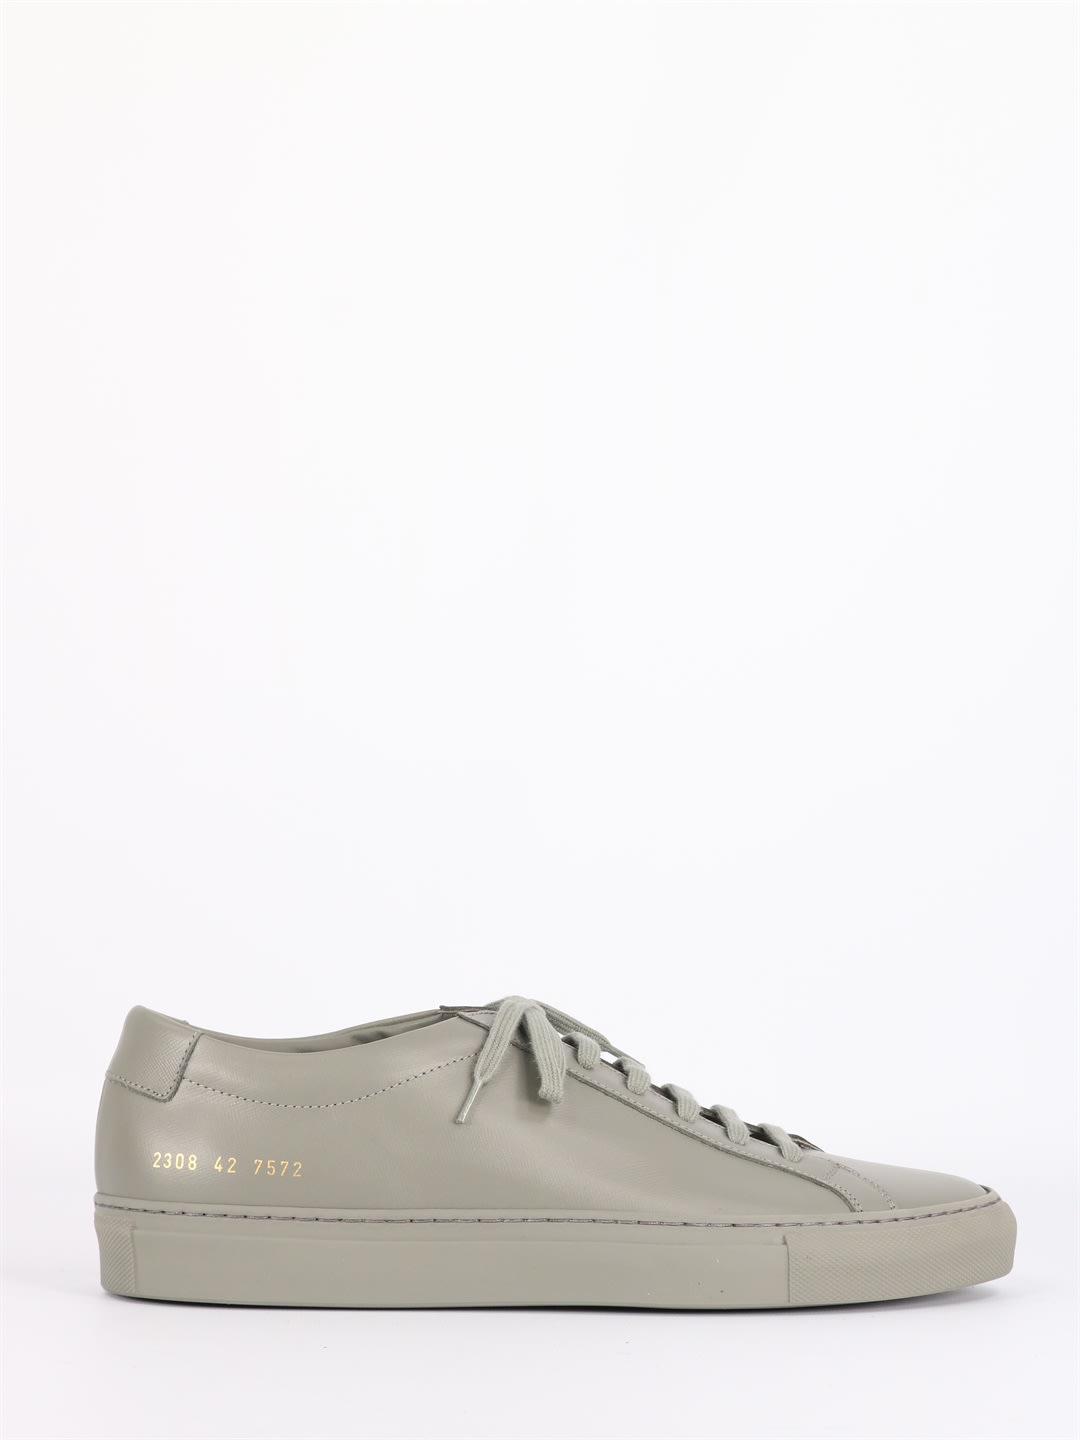 Common Projects Original Achilles Low Gray Sneakers